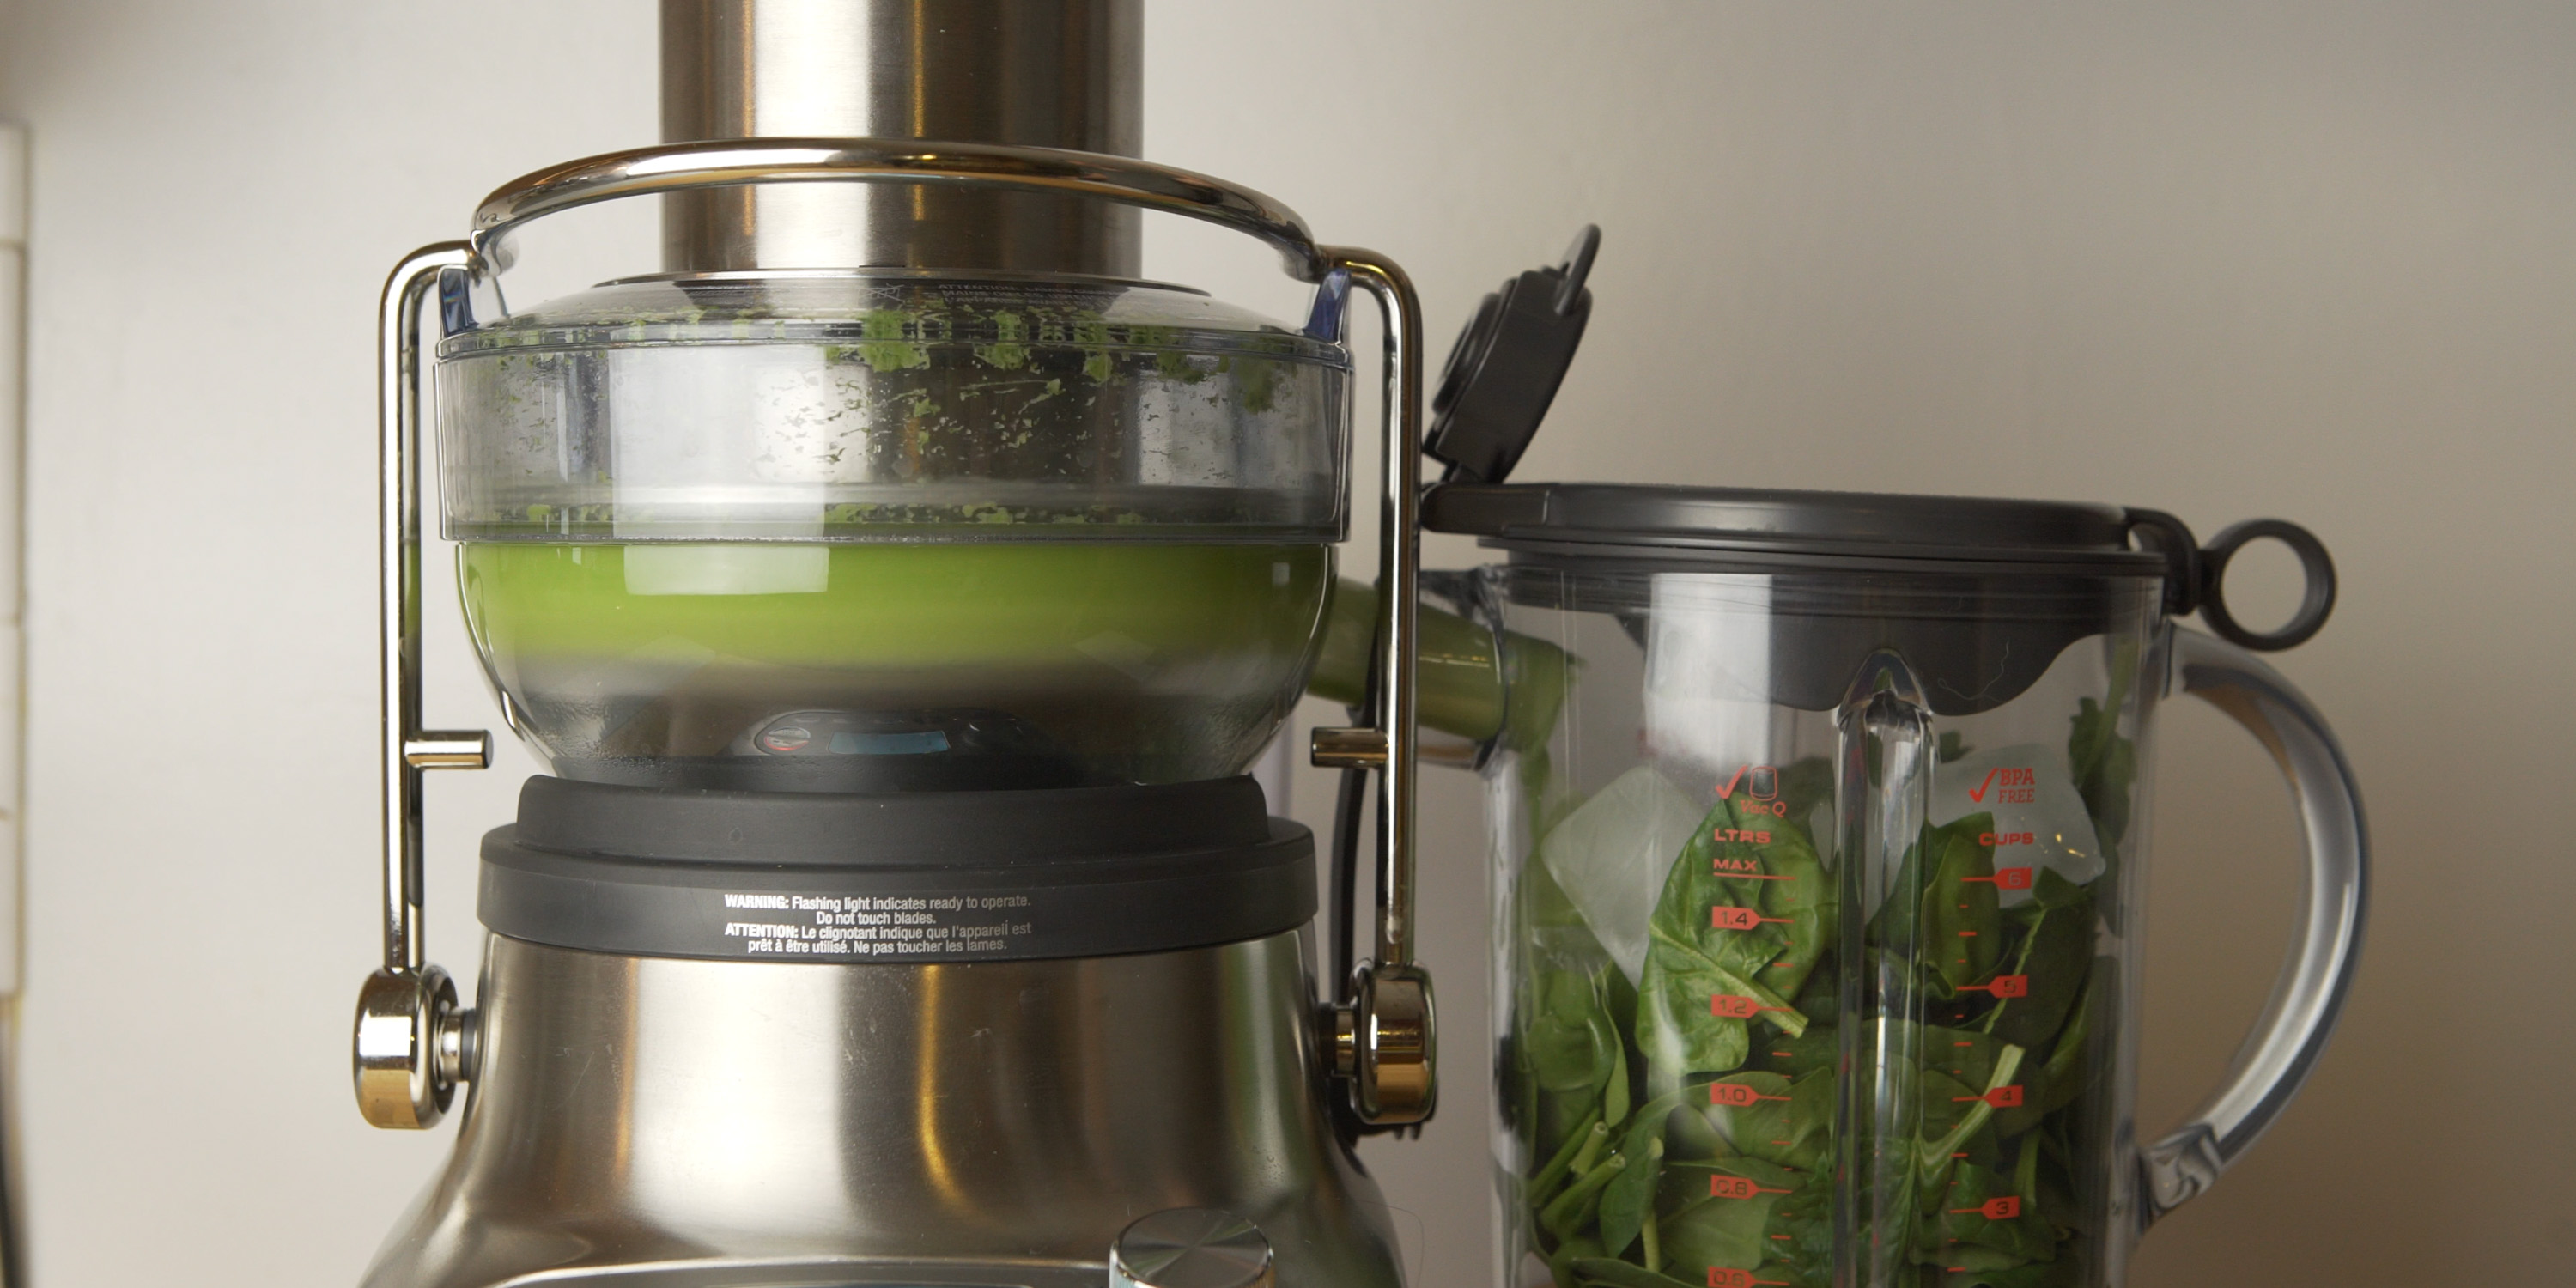 Juicing cucumbers with the 3X Bluicer Pro